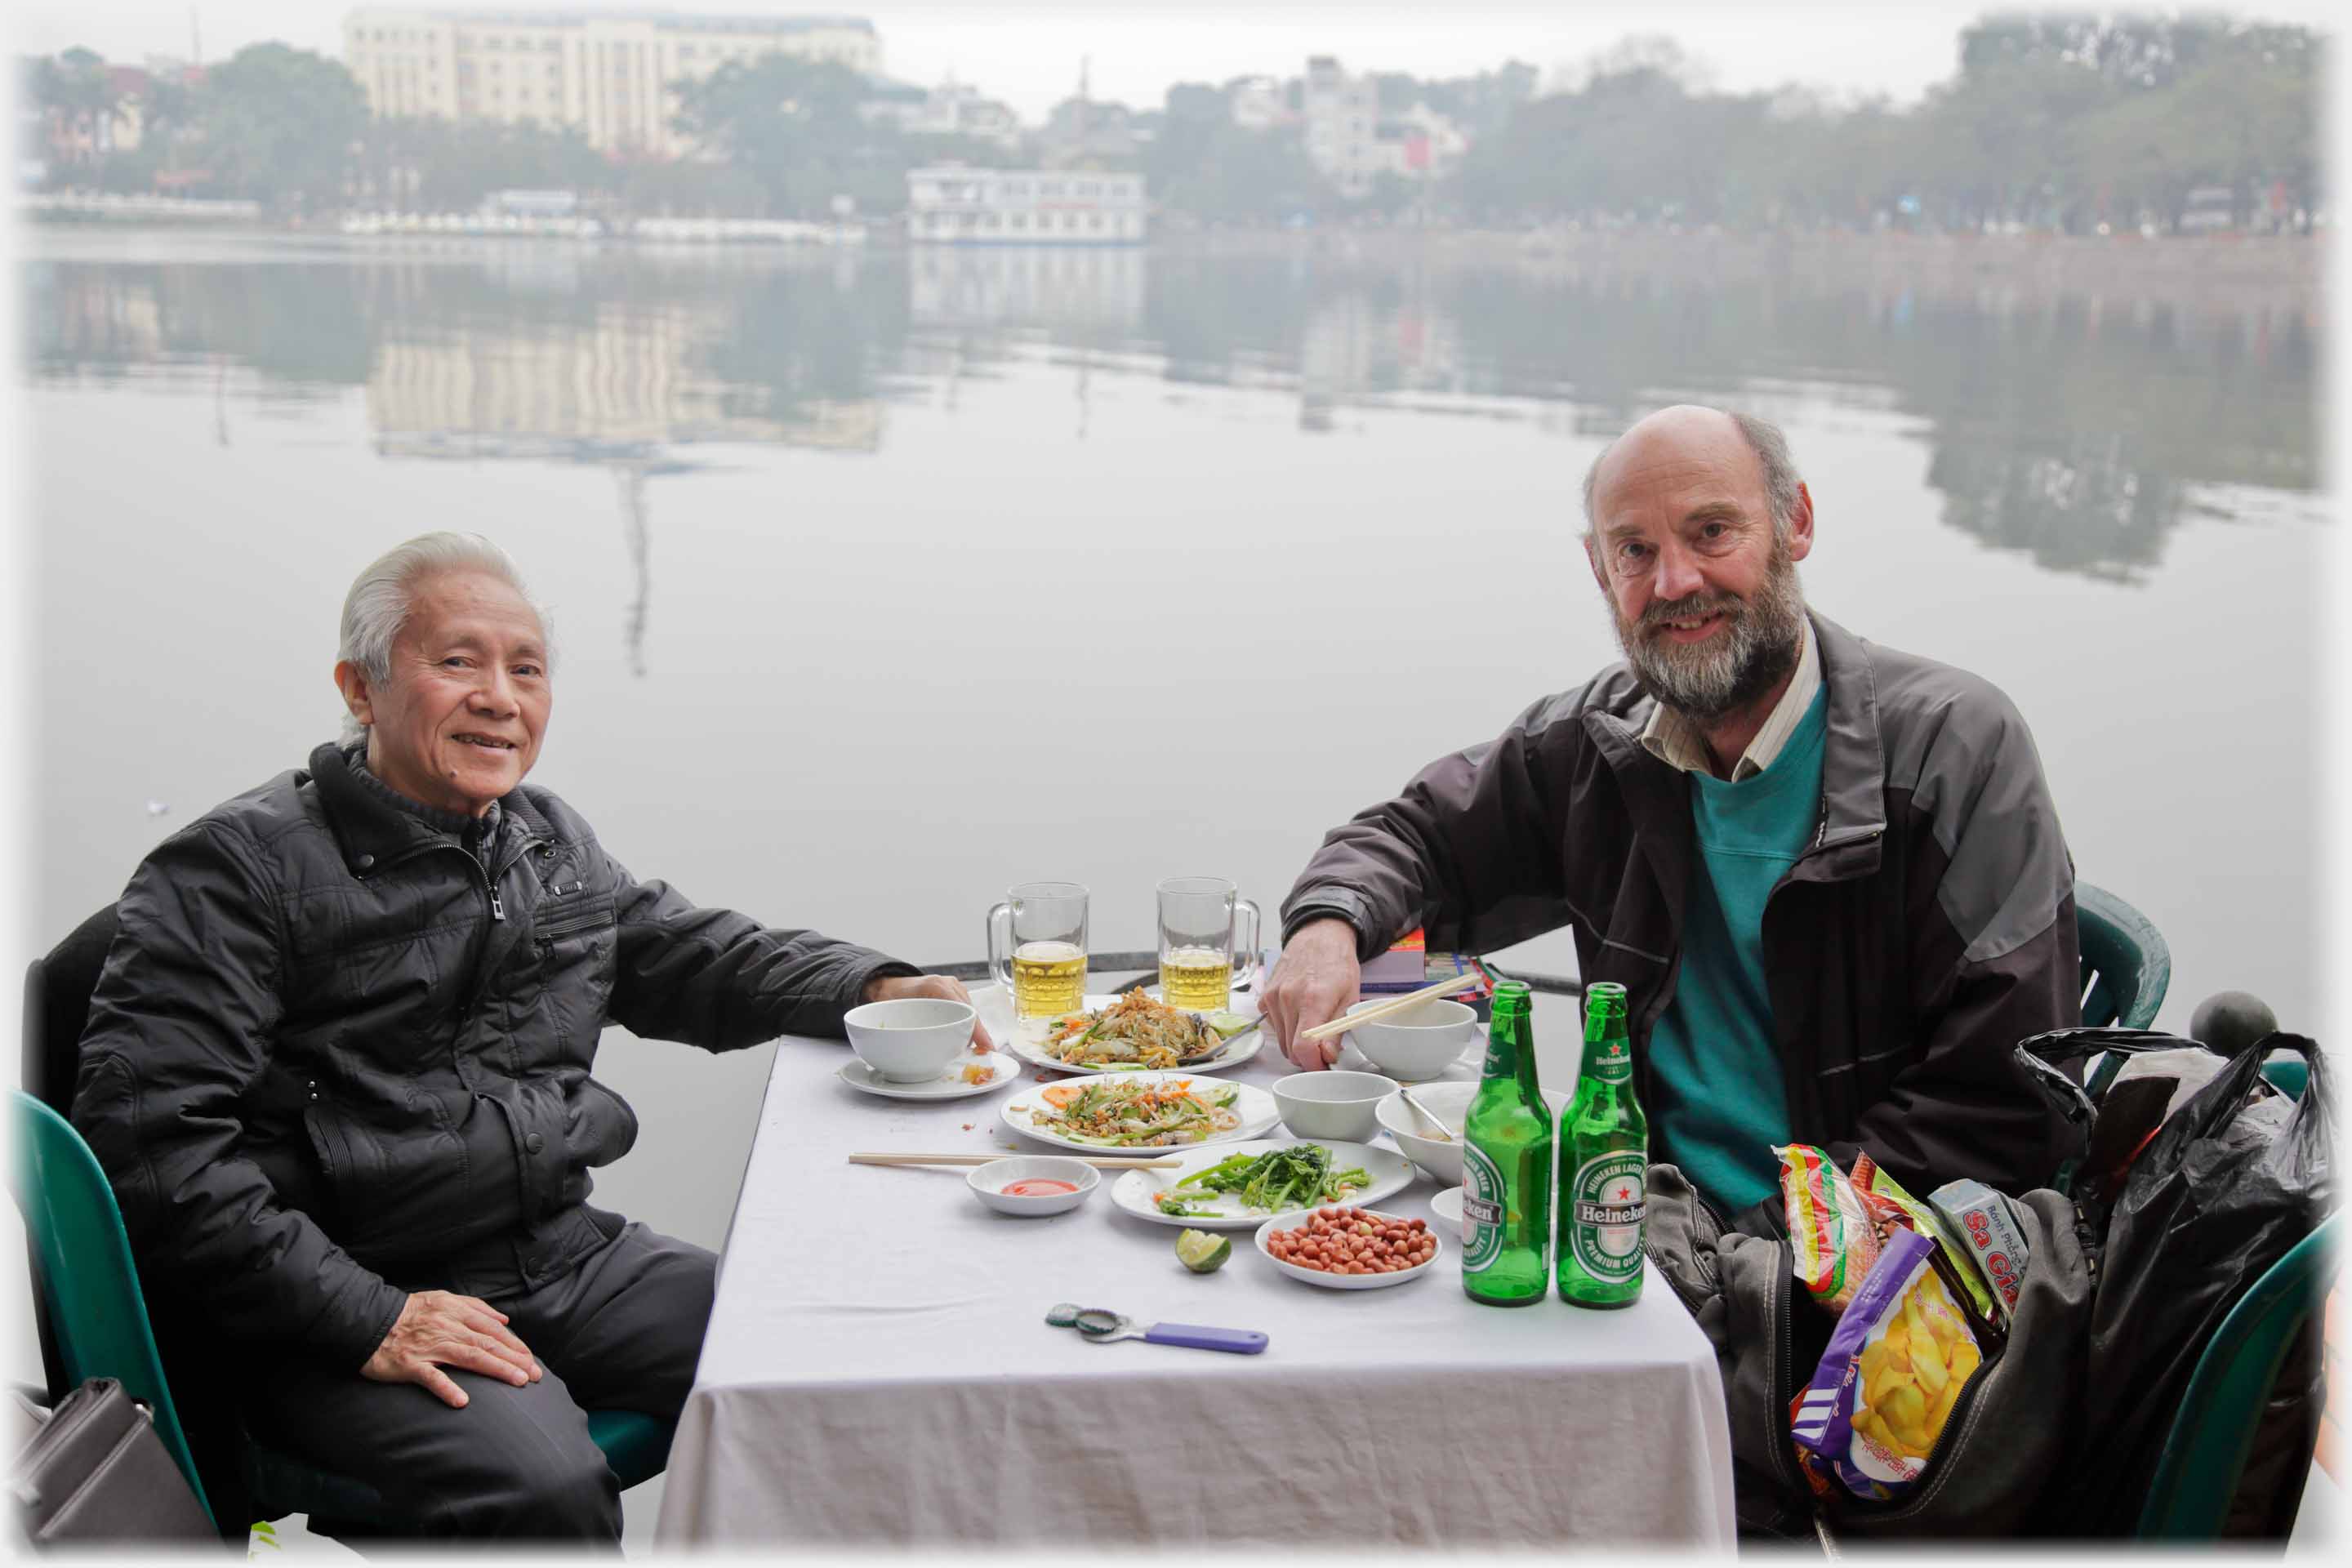 Two men at table with remains of meal by lake.